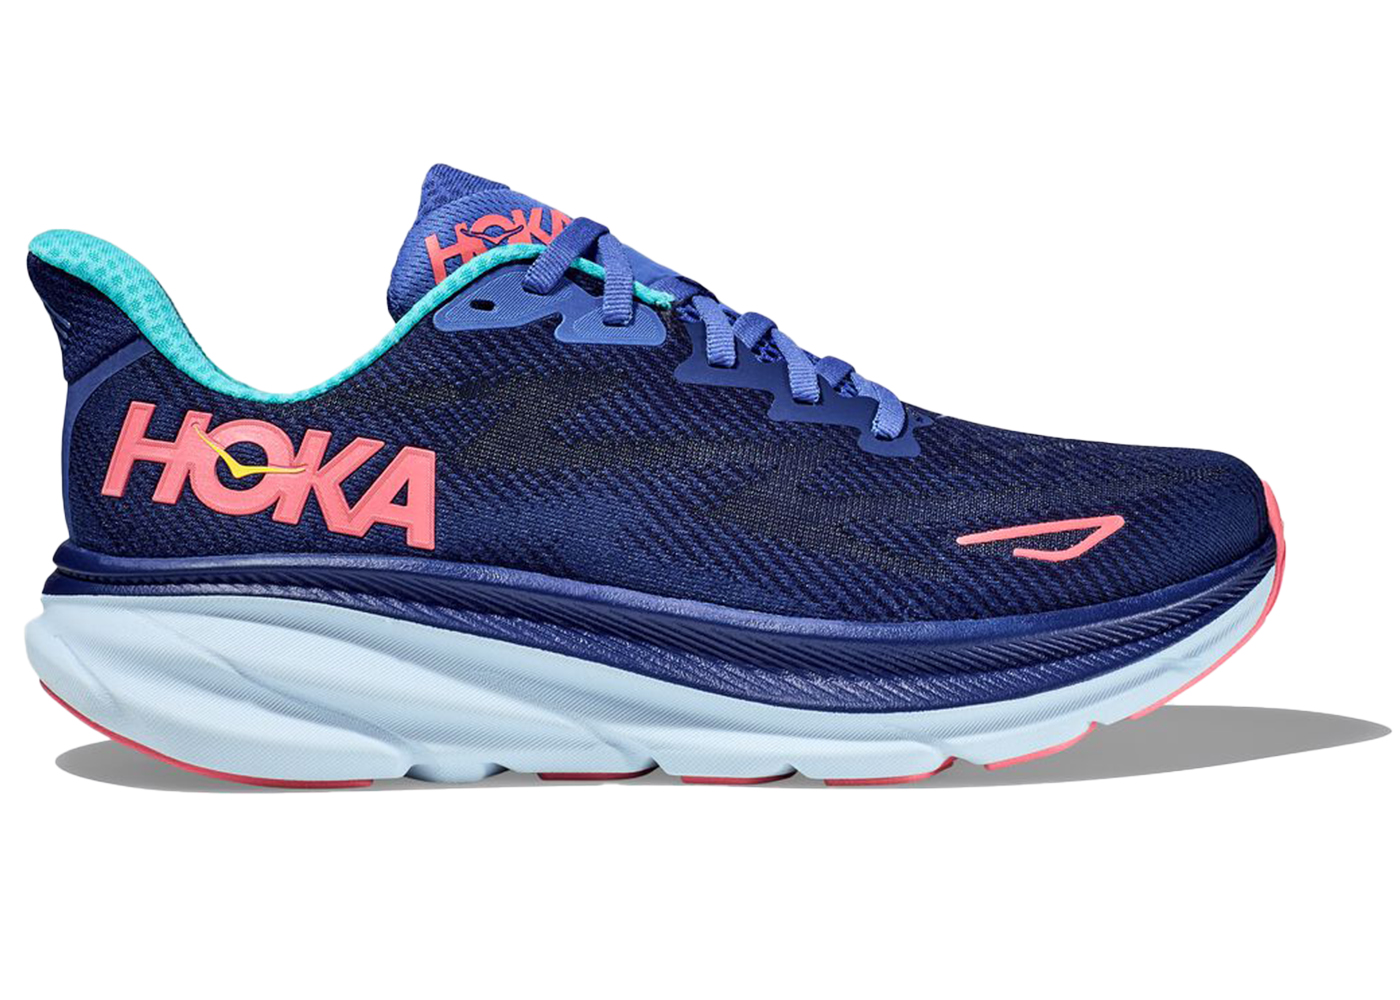 Hoka One One Clifton 9 Bellwether Blue (Women's) - 1127896-BBCRM - US